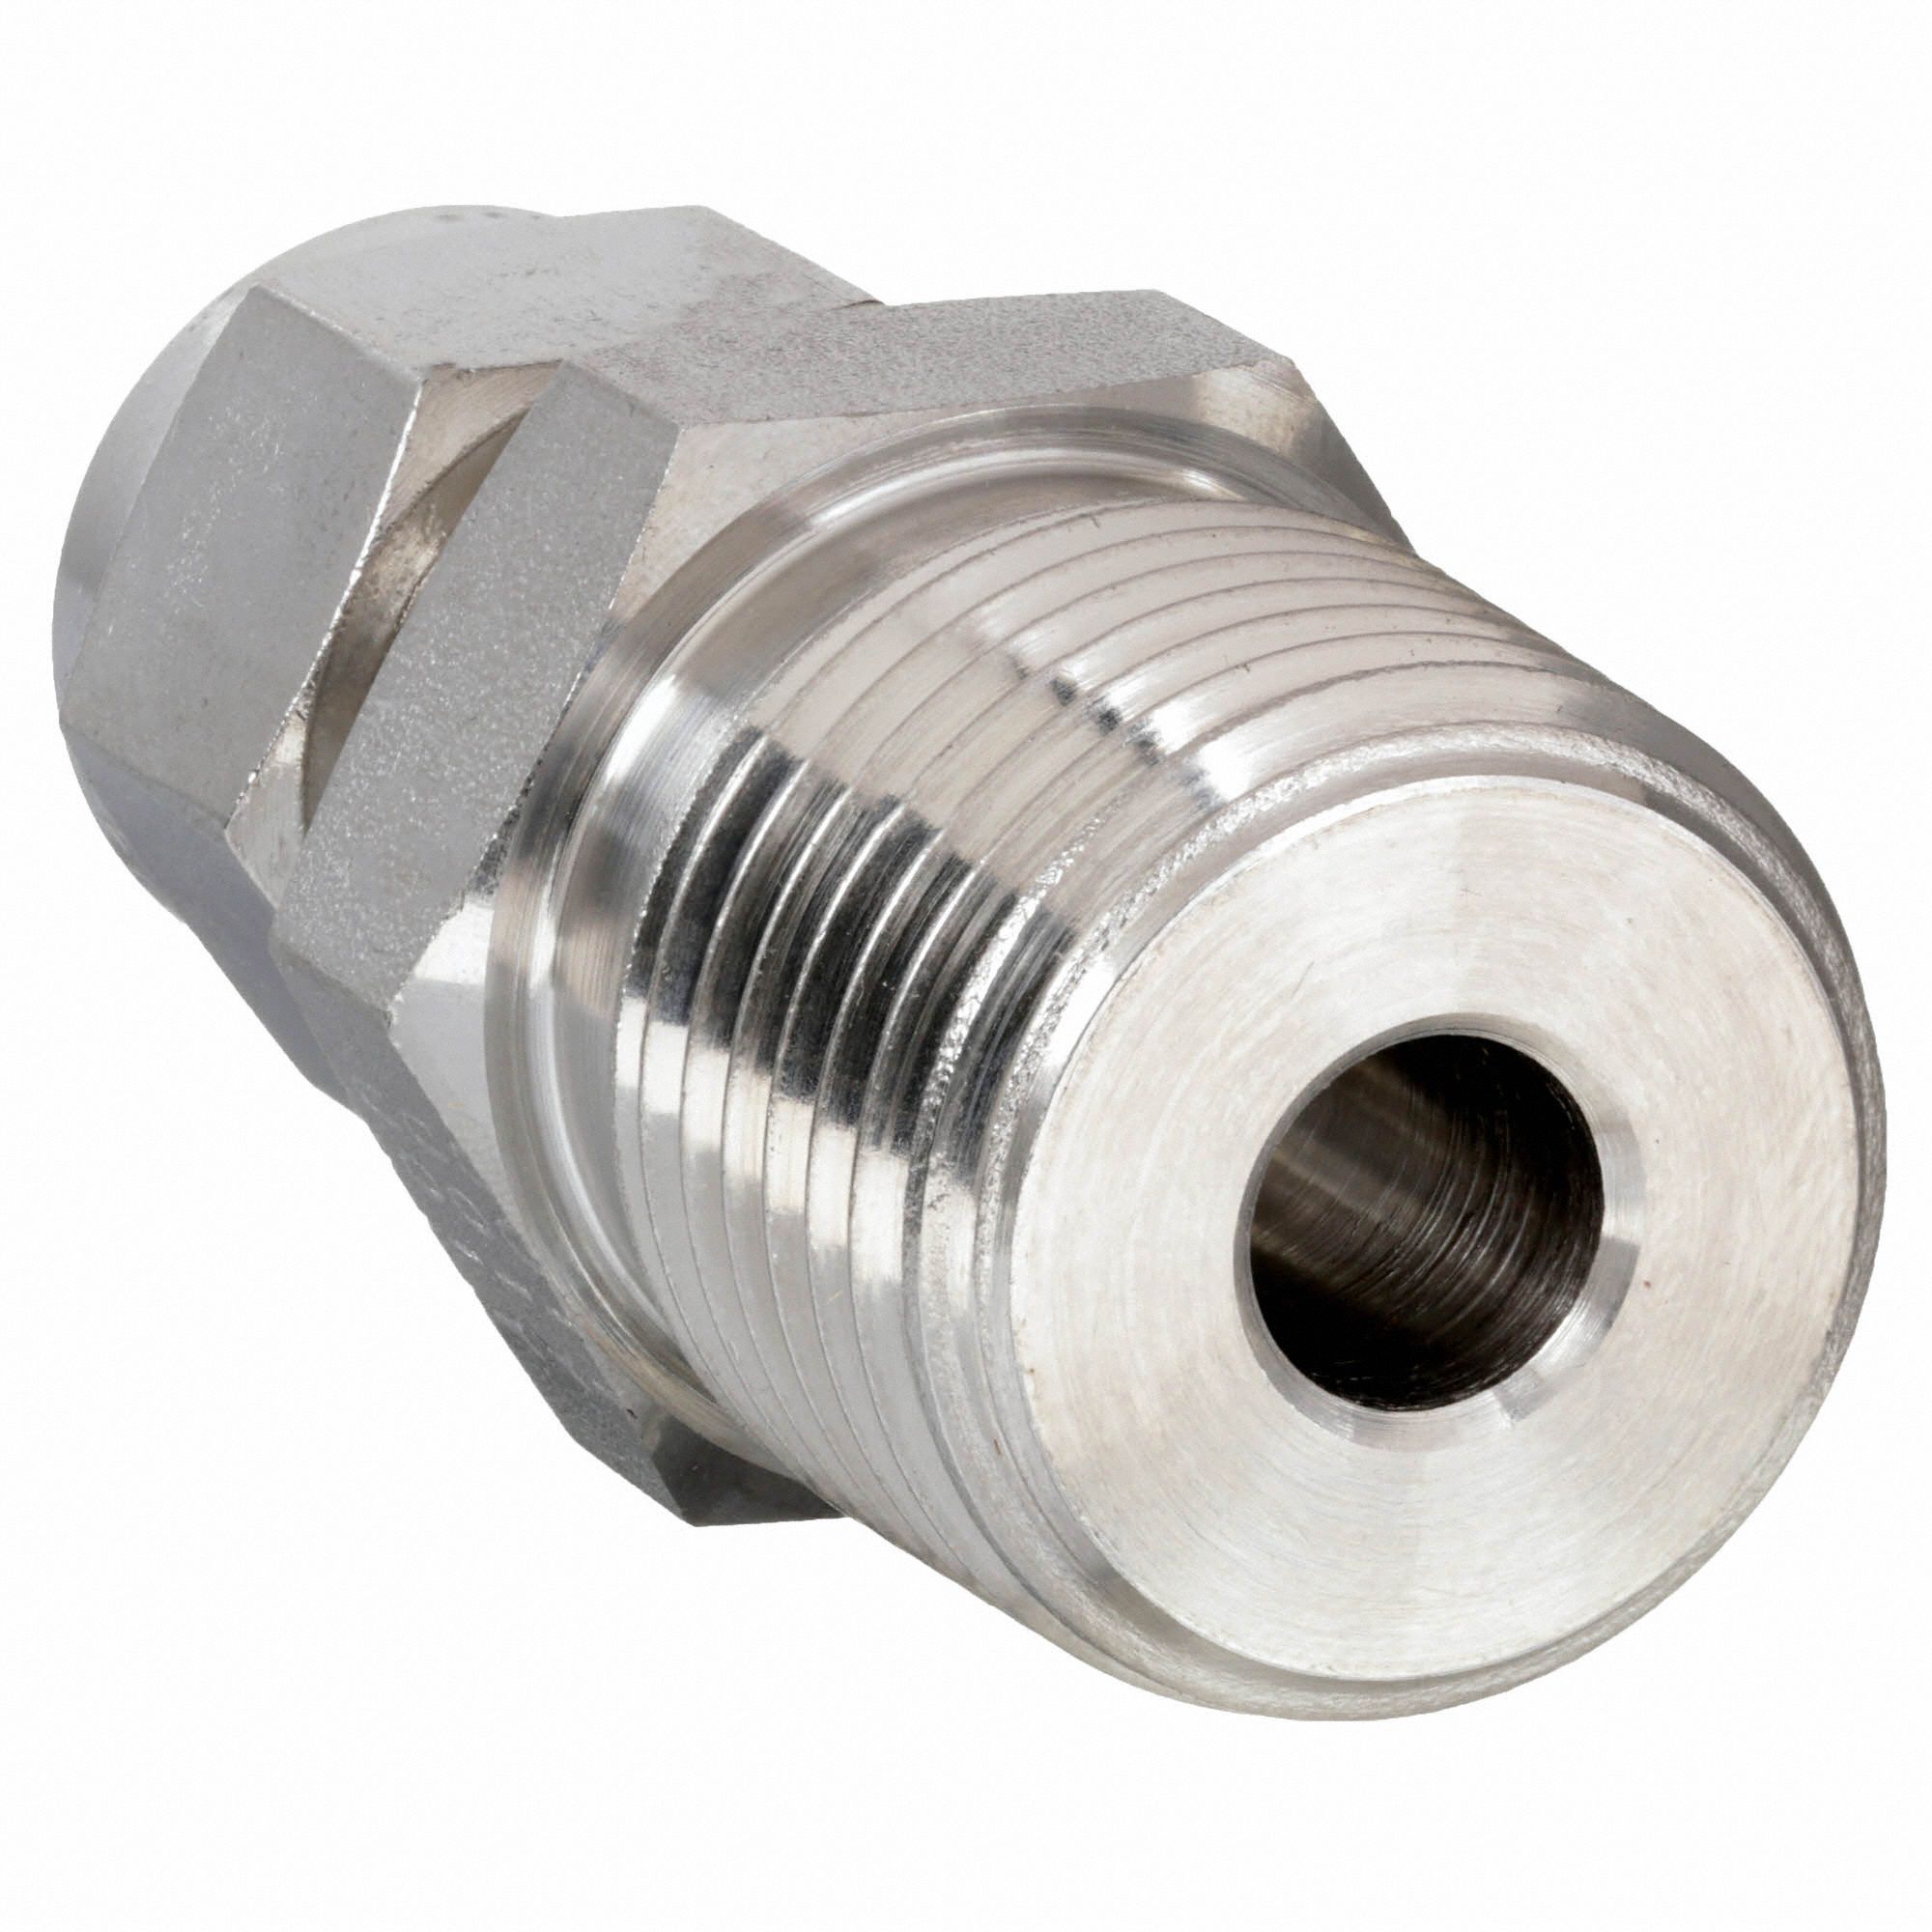 SS-400-1-8 1/4" X 1/2" Male Connector Parker Alok 4MSC8N-316 Stainless Steel 